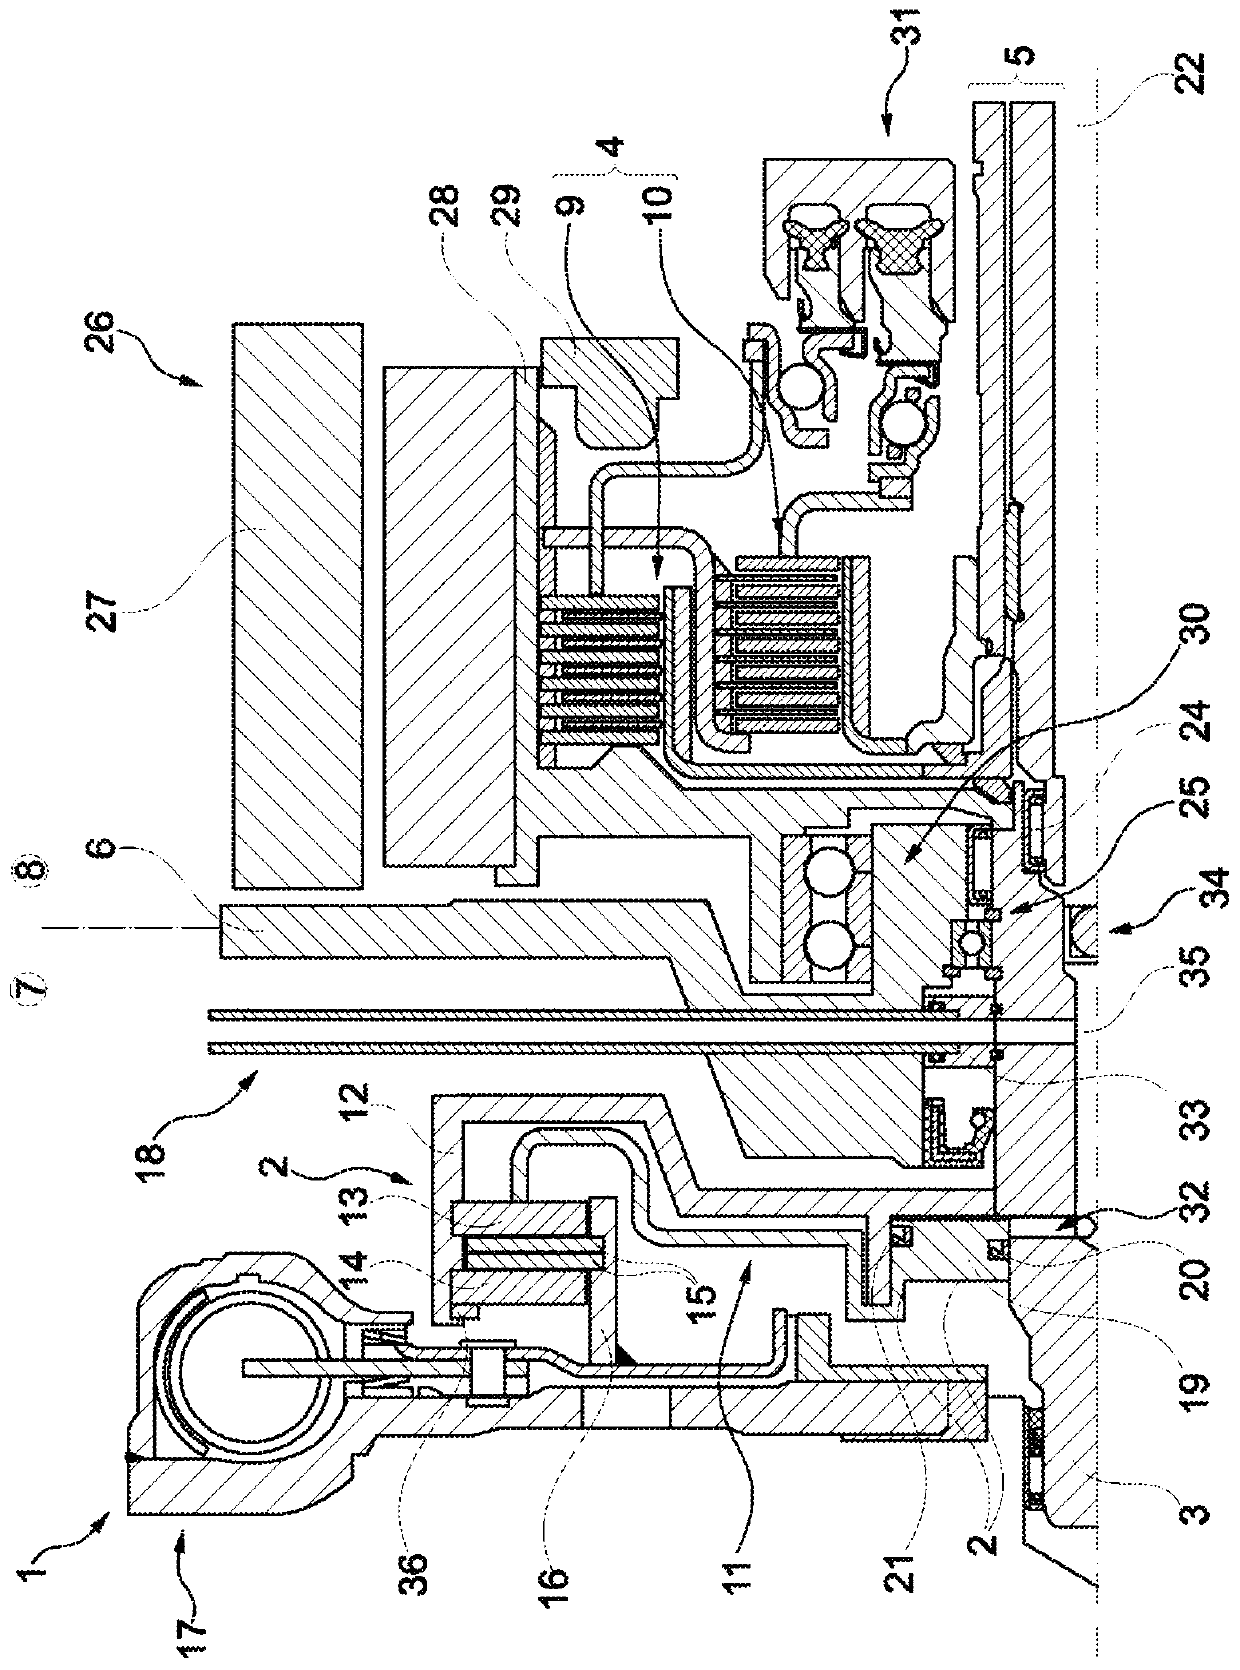 Hybrid module with separating clutch outside of the housing